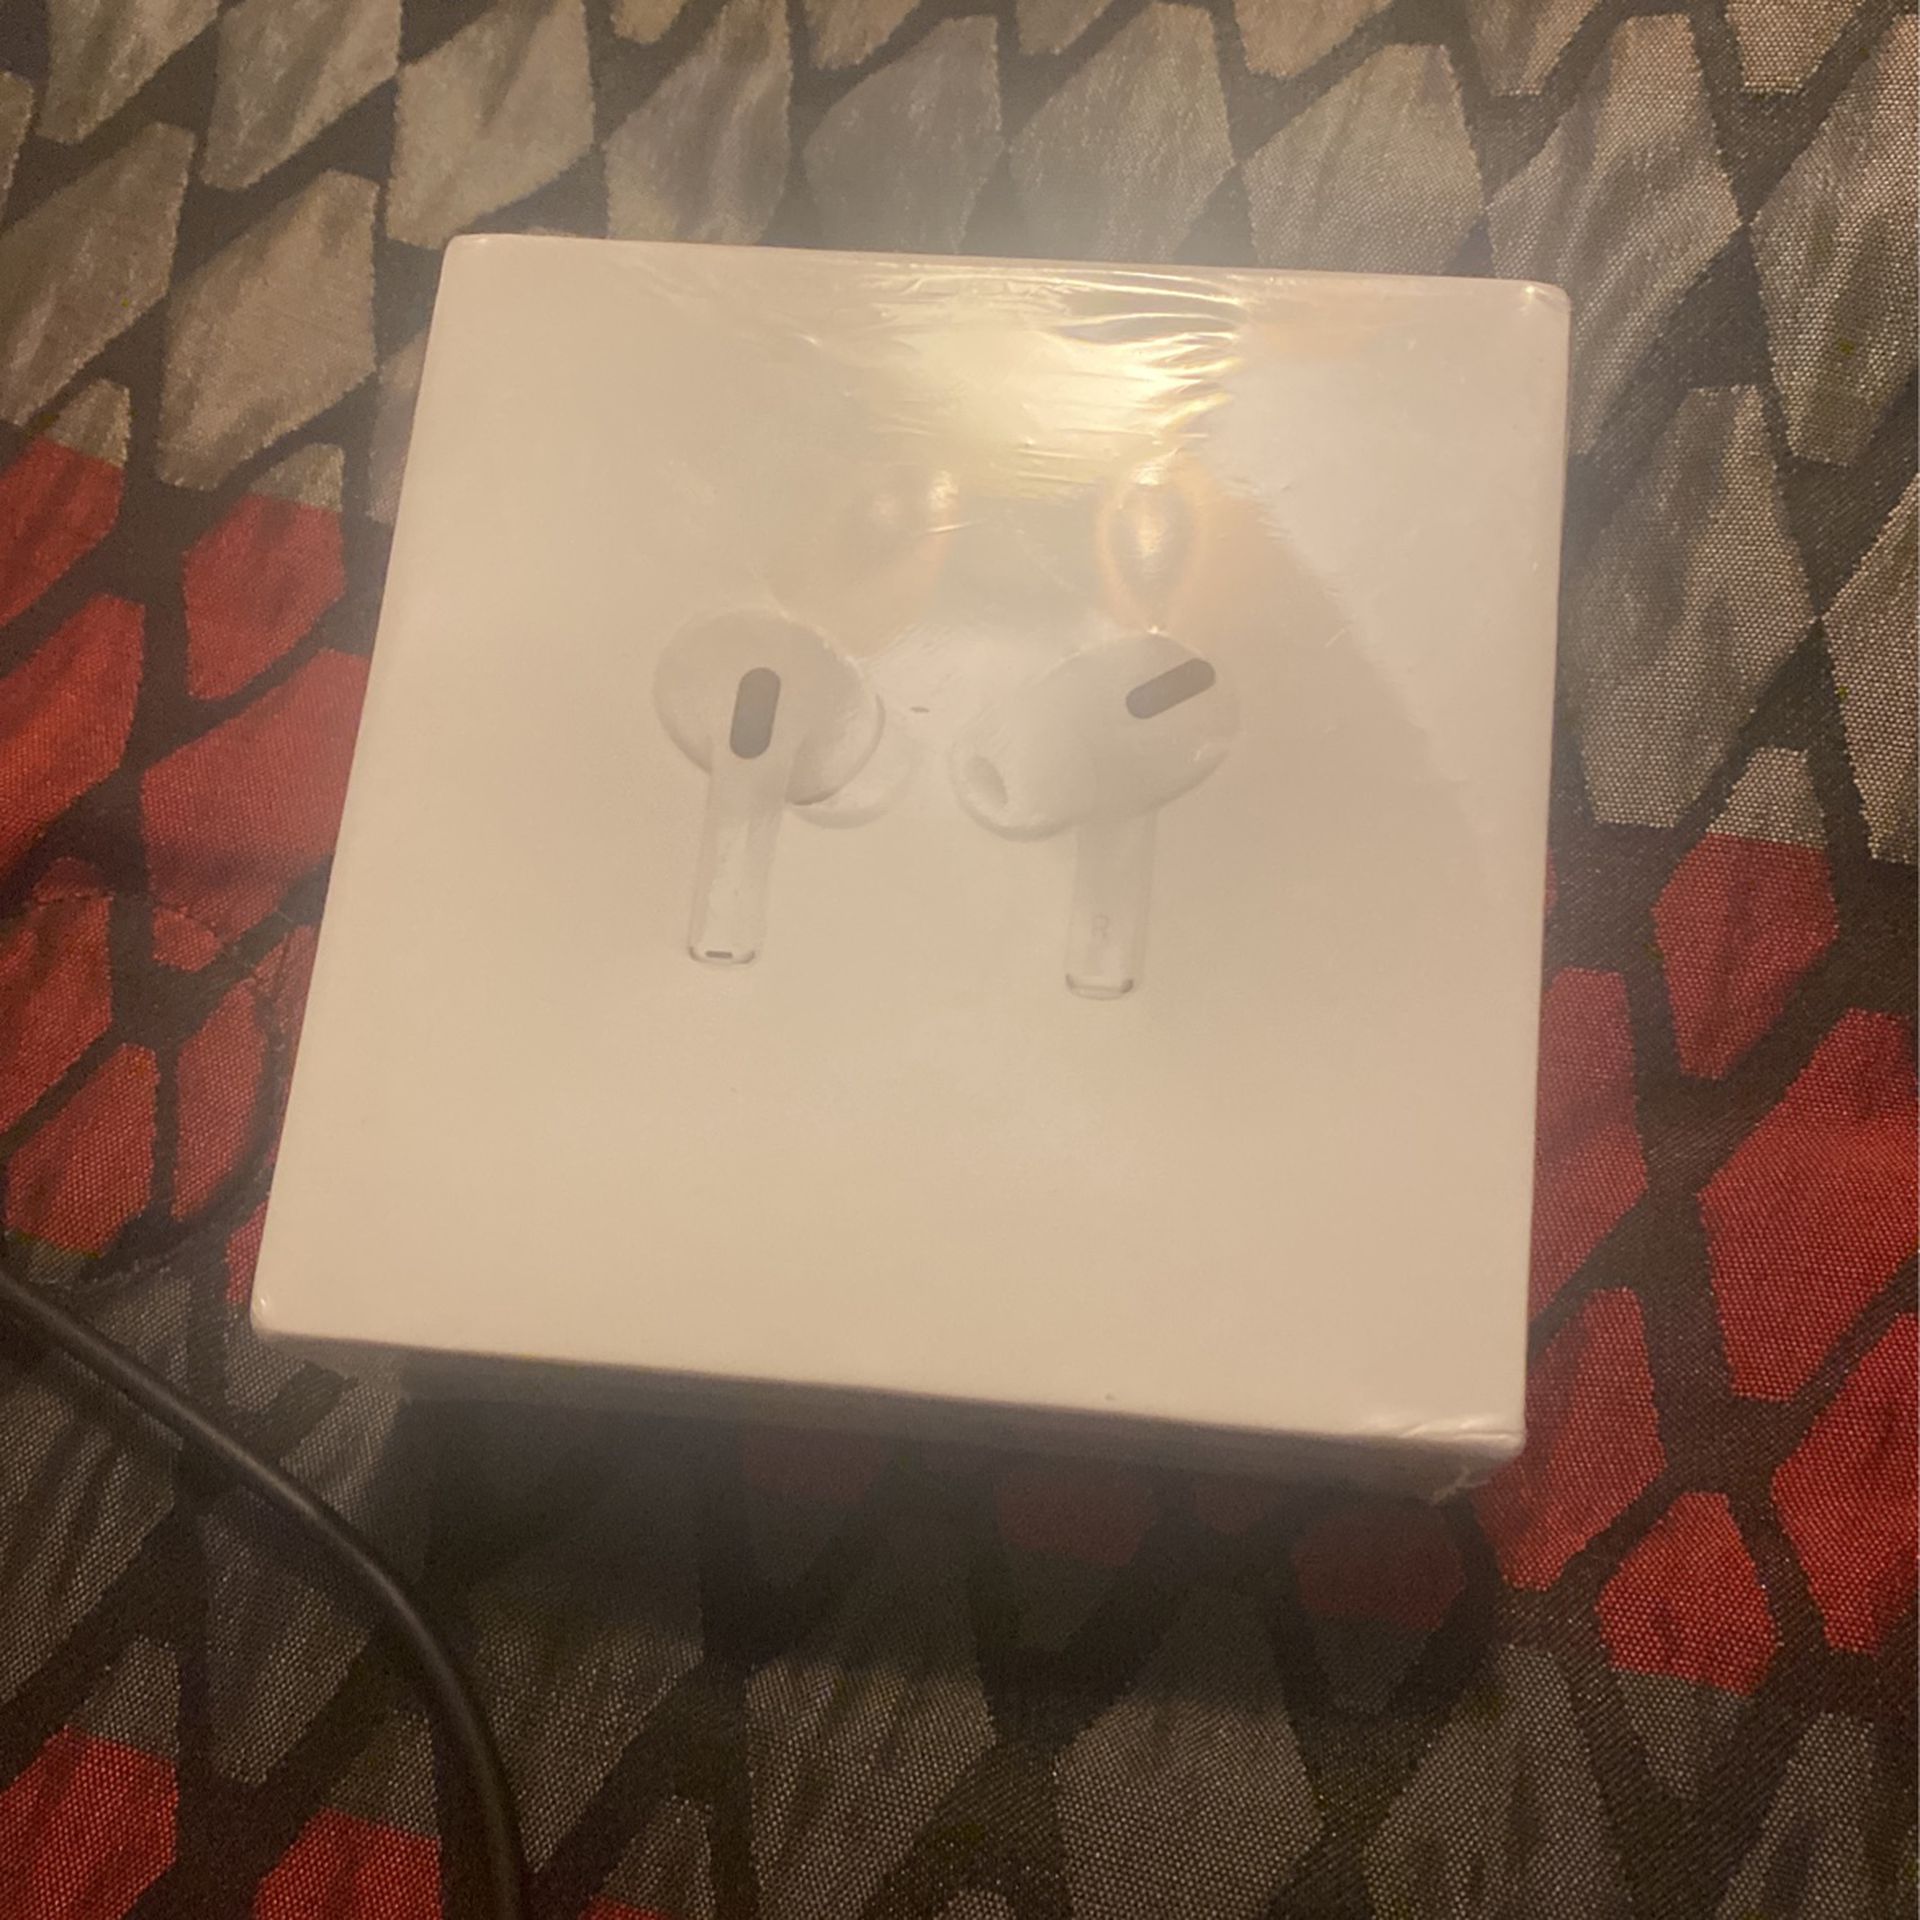 airpod pros with magsafe charging case